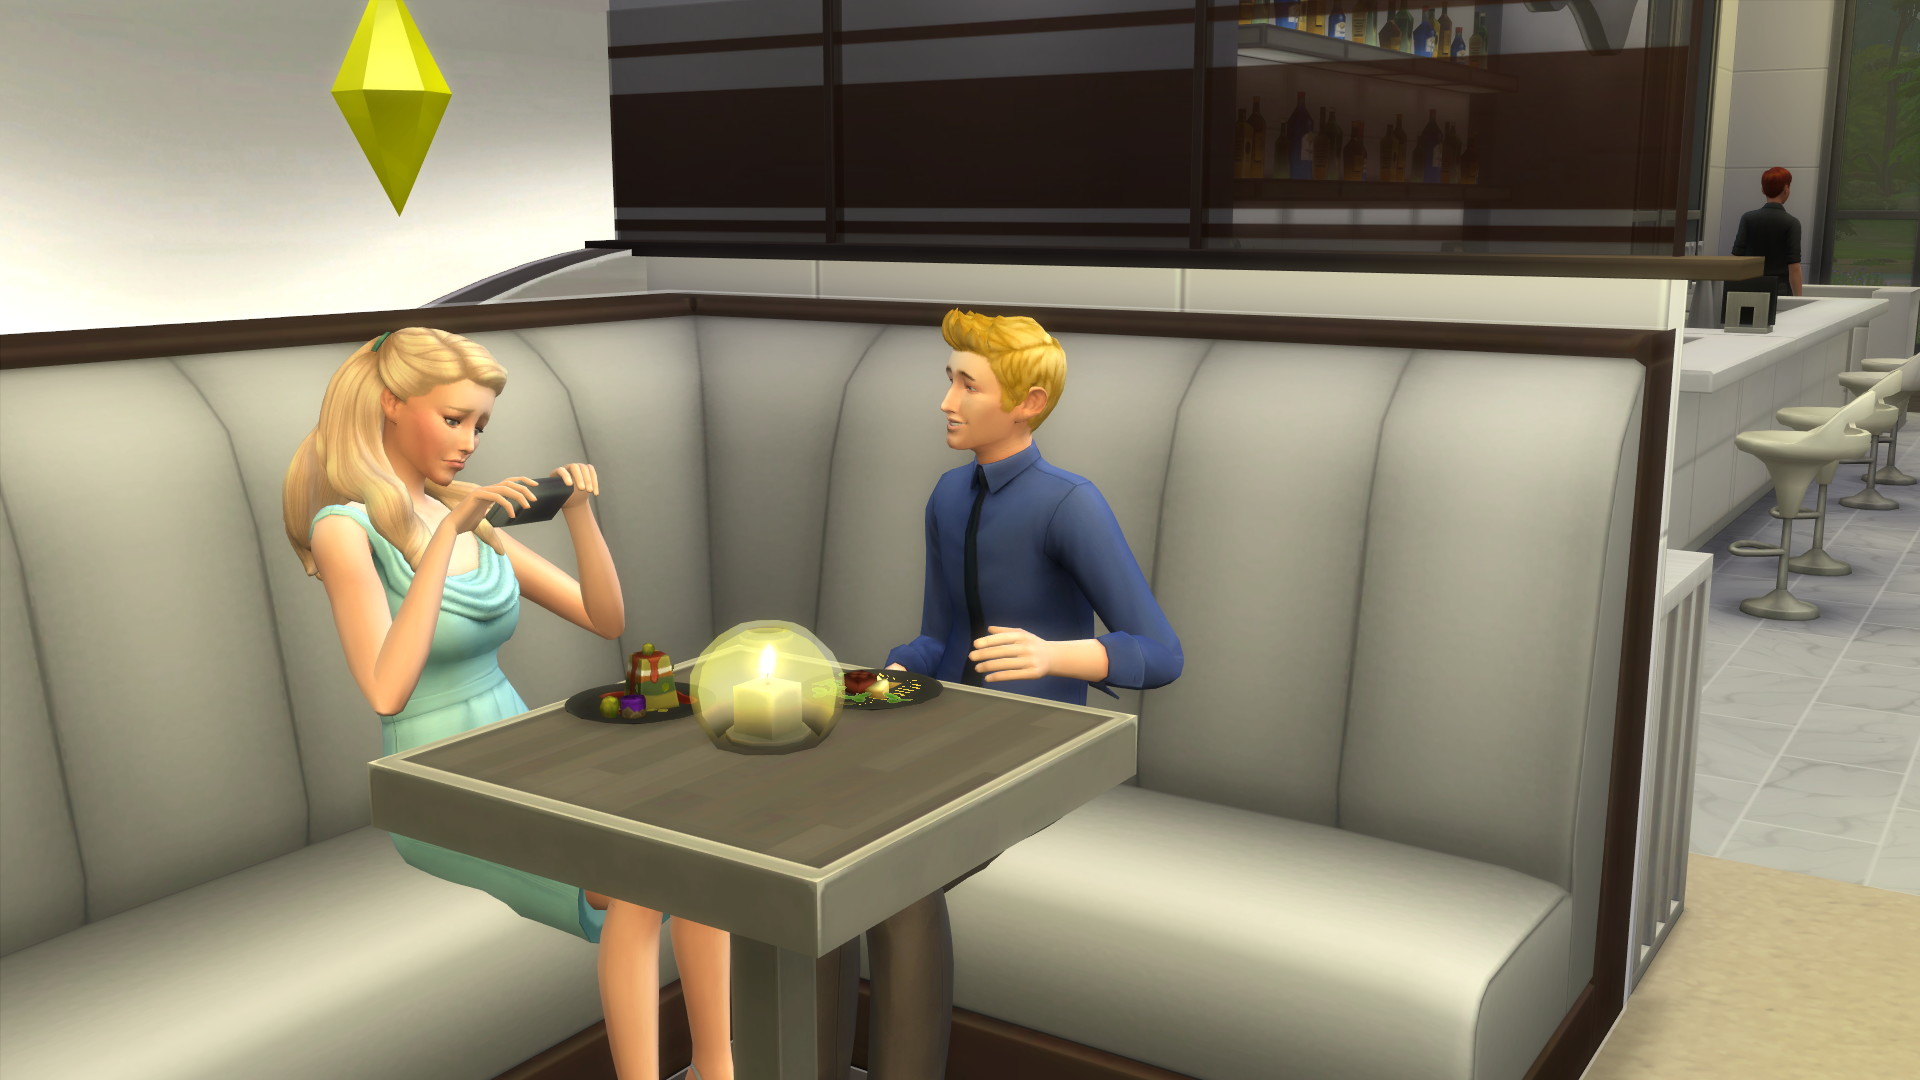 The Sims 4: Dine Out - screenshot 3